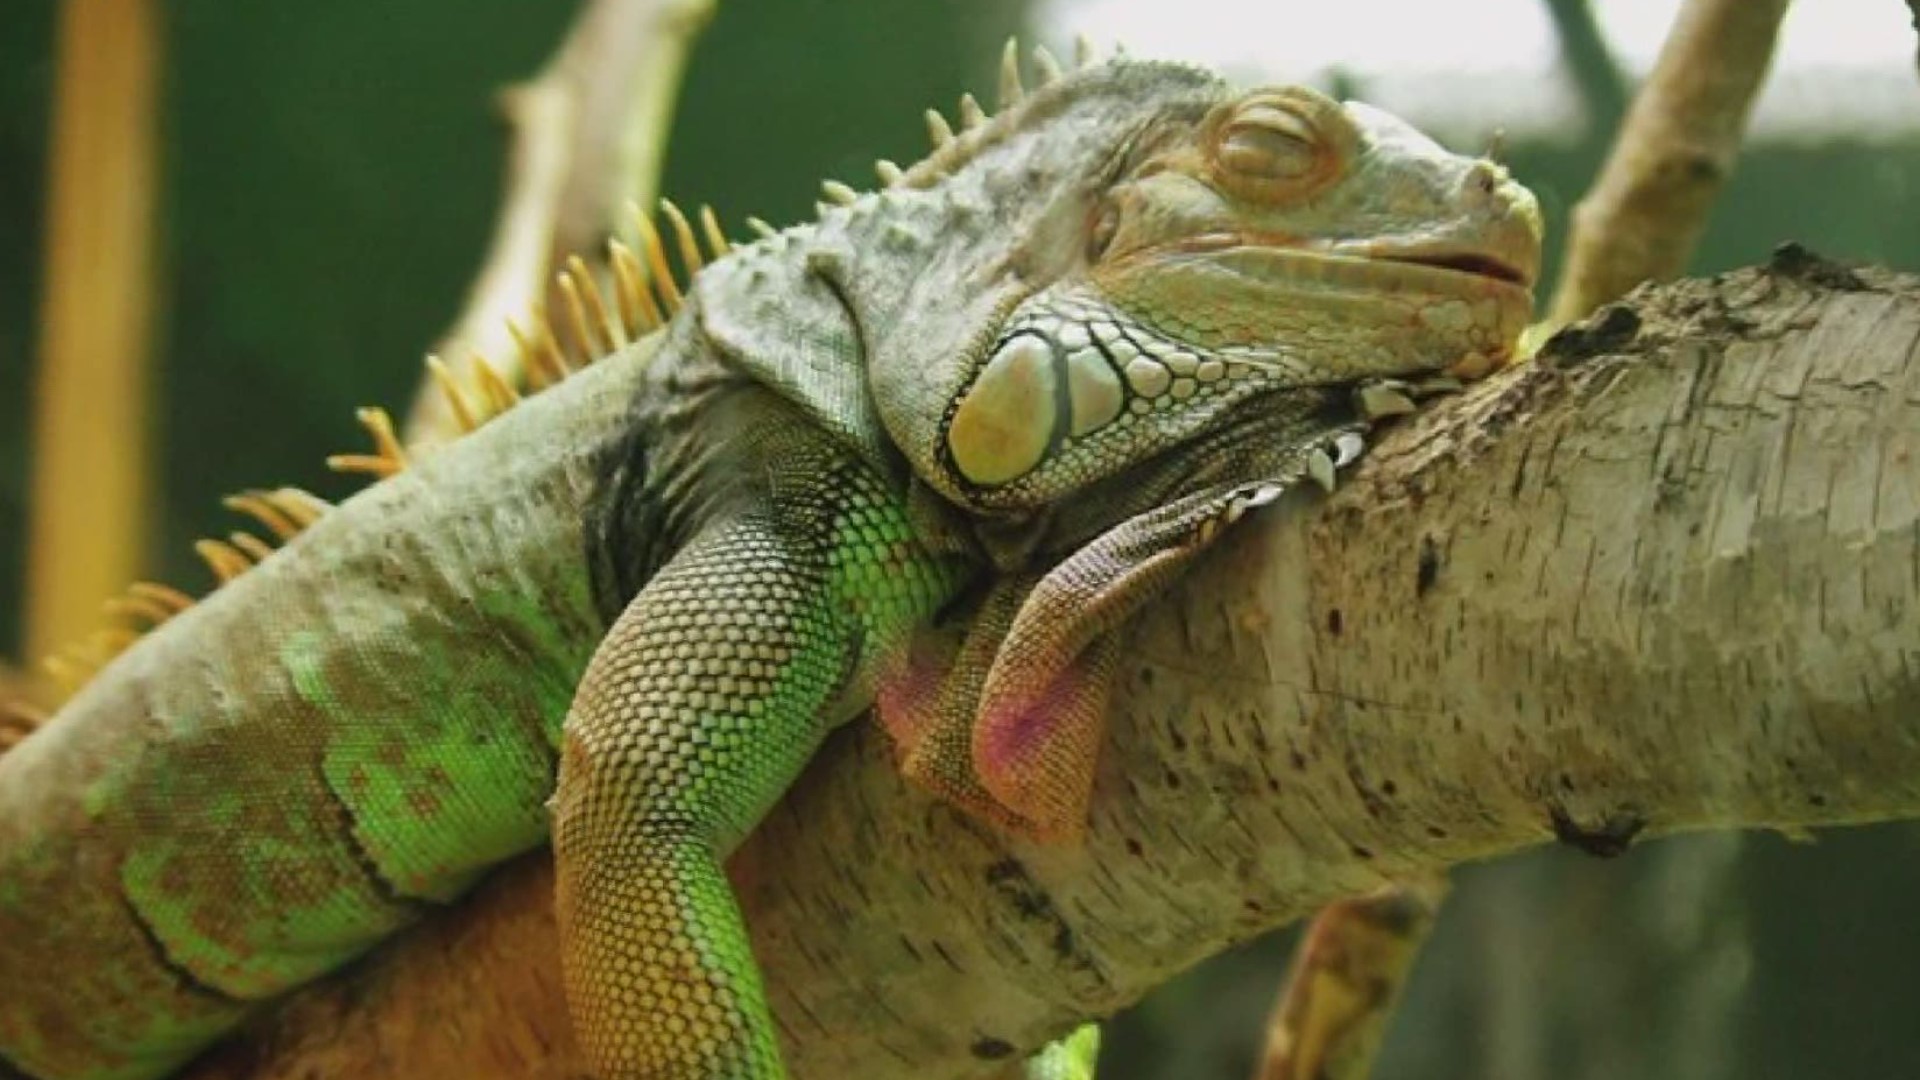 Even colder weather could have prompted a “falling iguana alert” as they start to fall from trees.